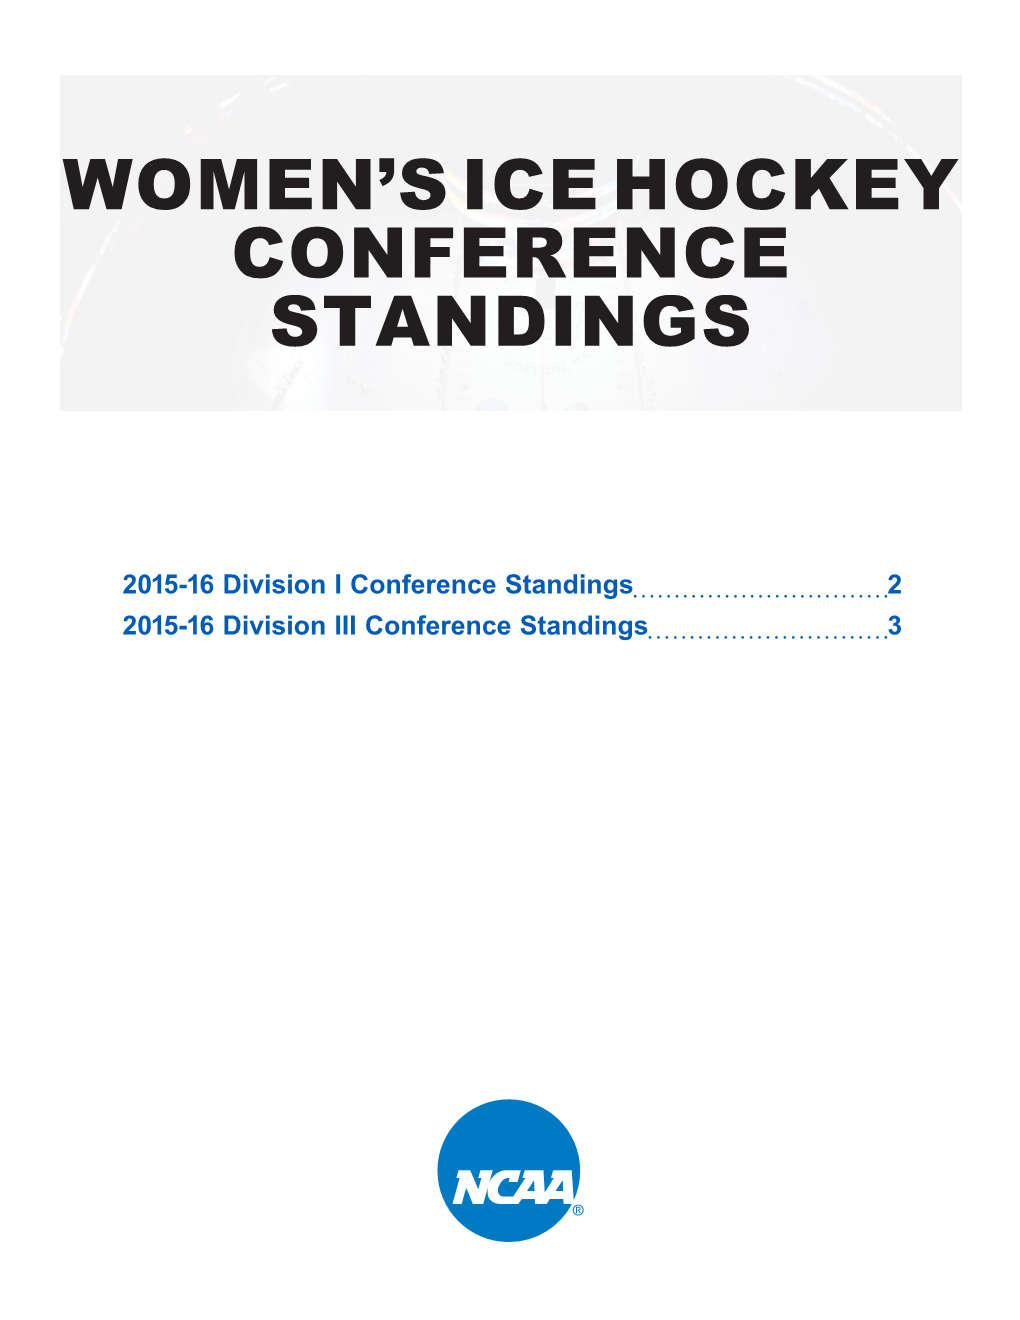 Women's Ice Hockey Conference Standings